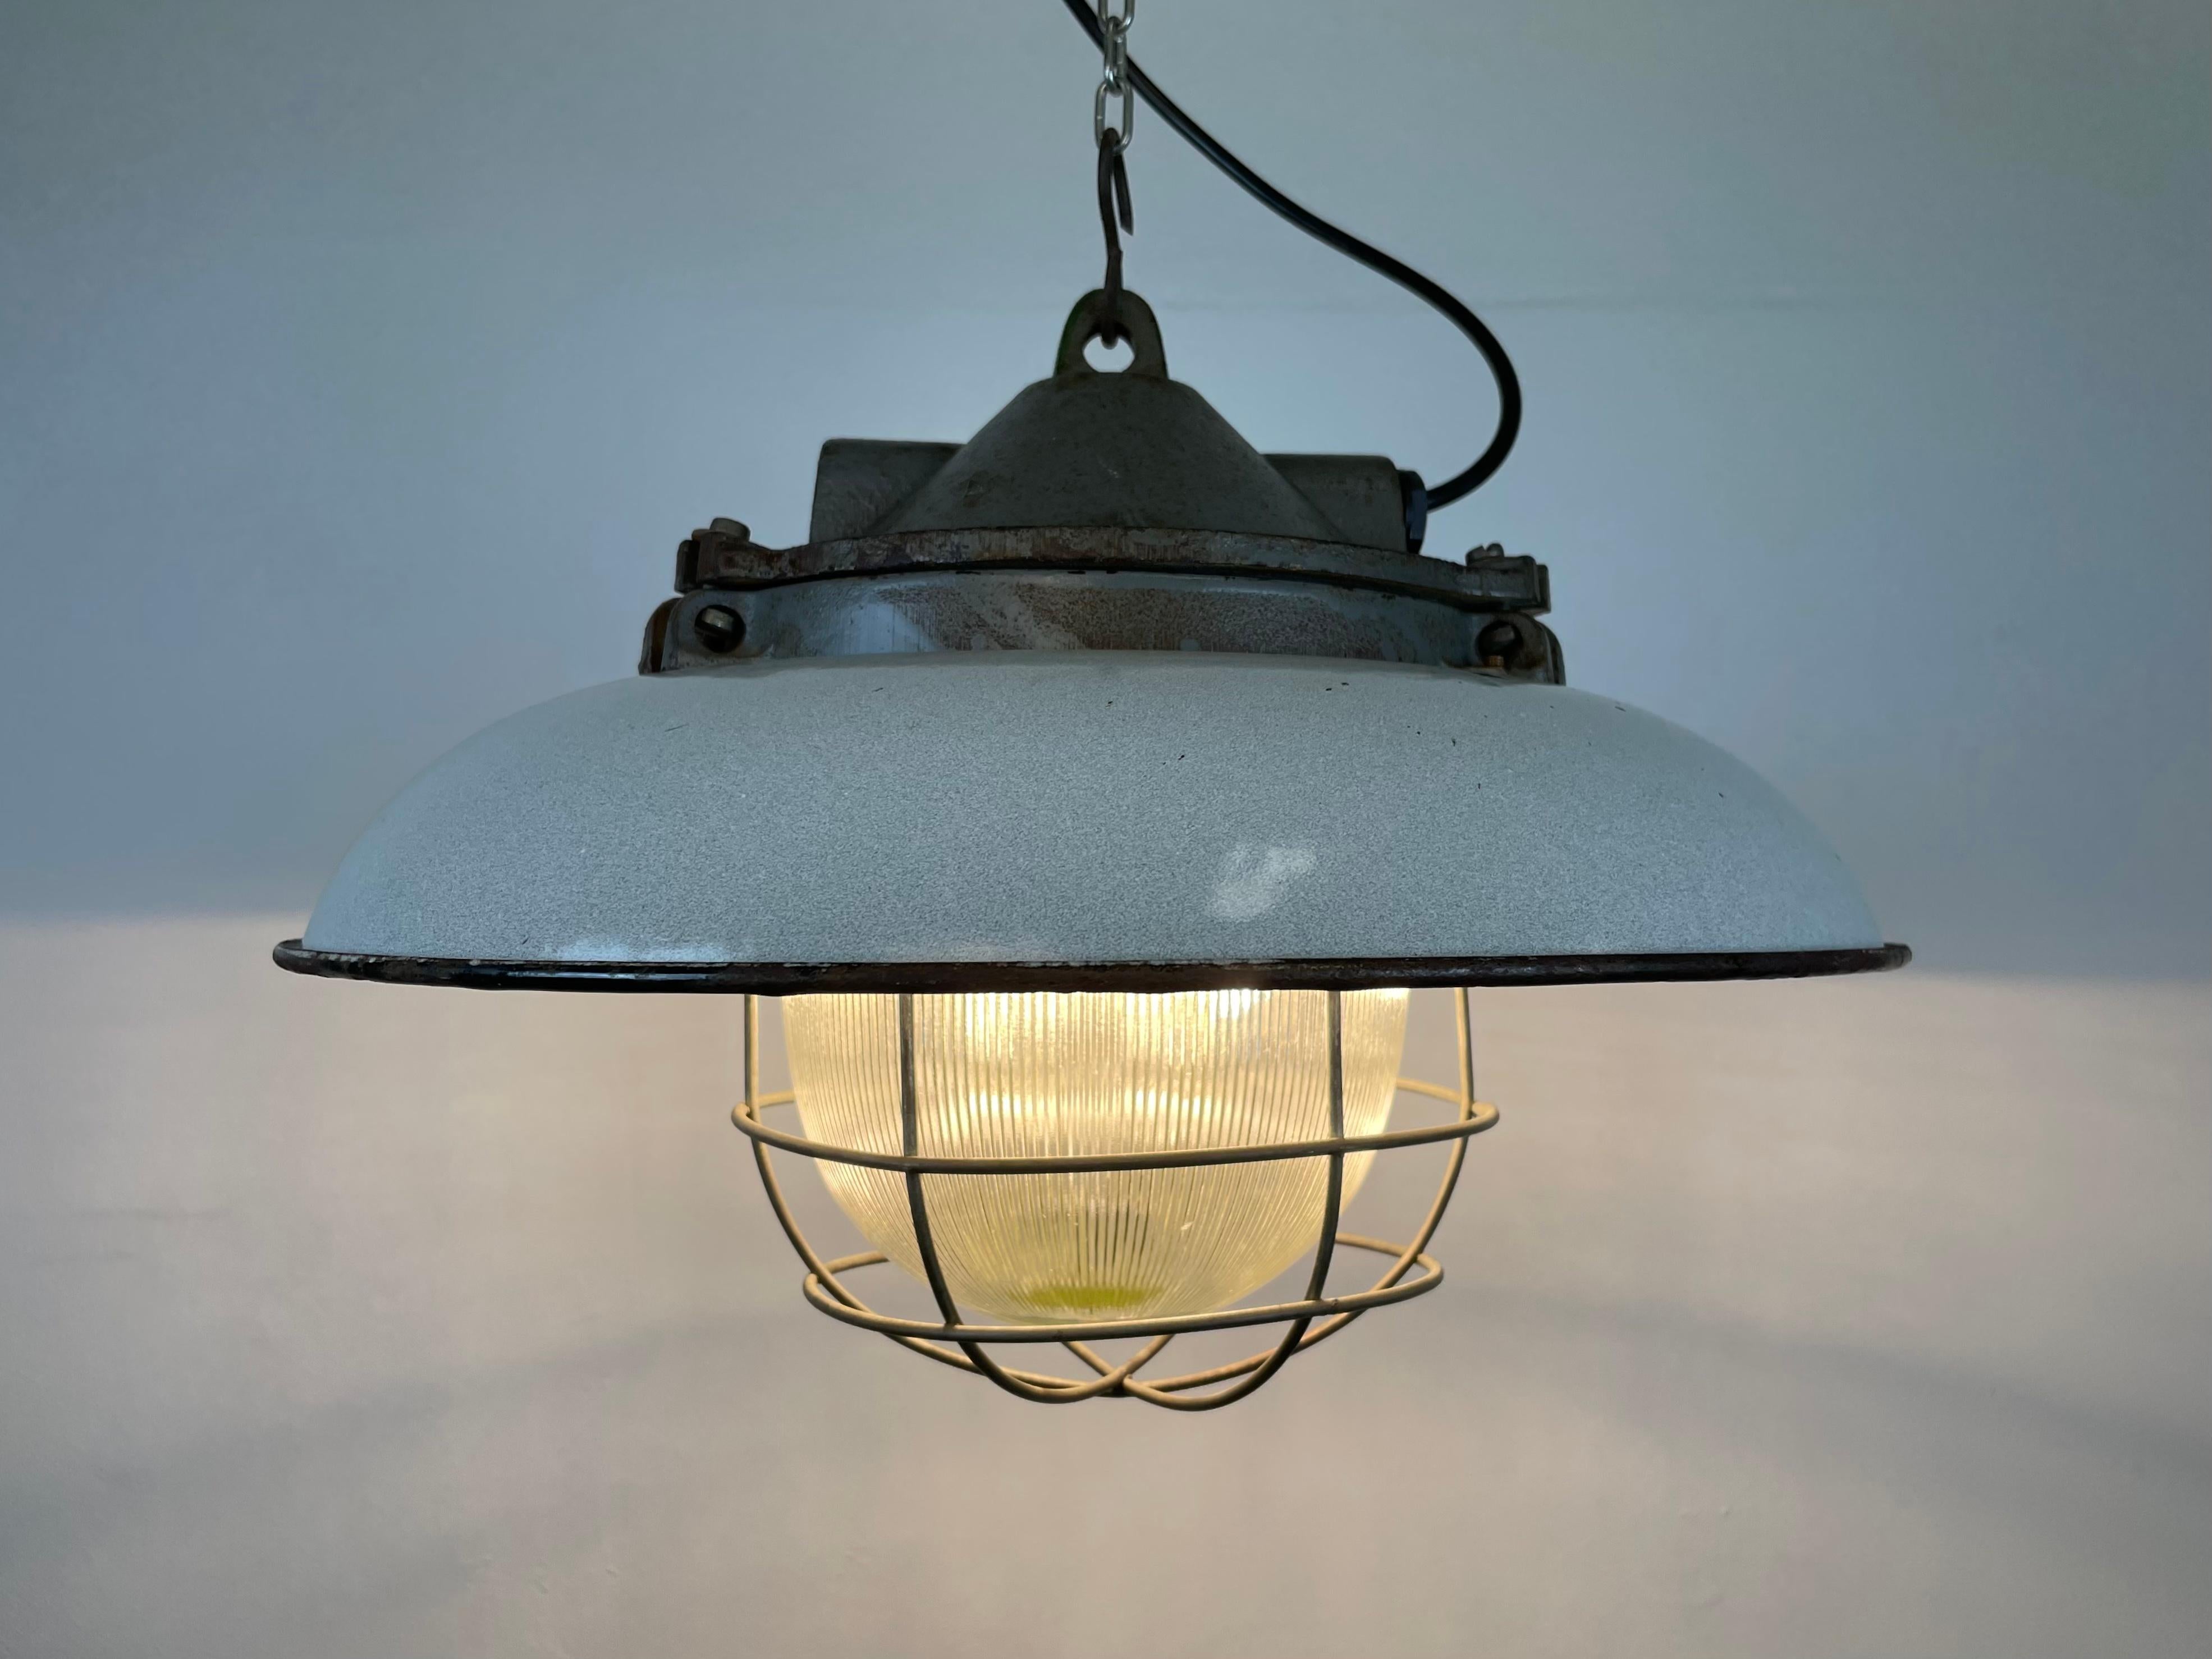 Industrial Grey Enamel Factory Cage Pendant Lamp in Cast Iron from Zaos, 1960s For Sale 9